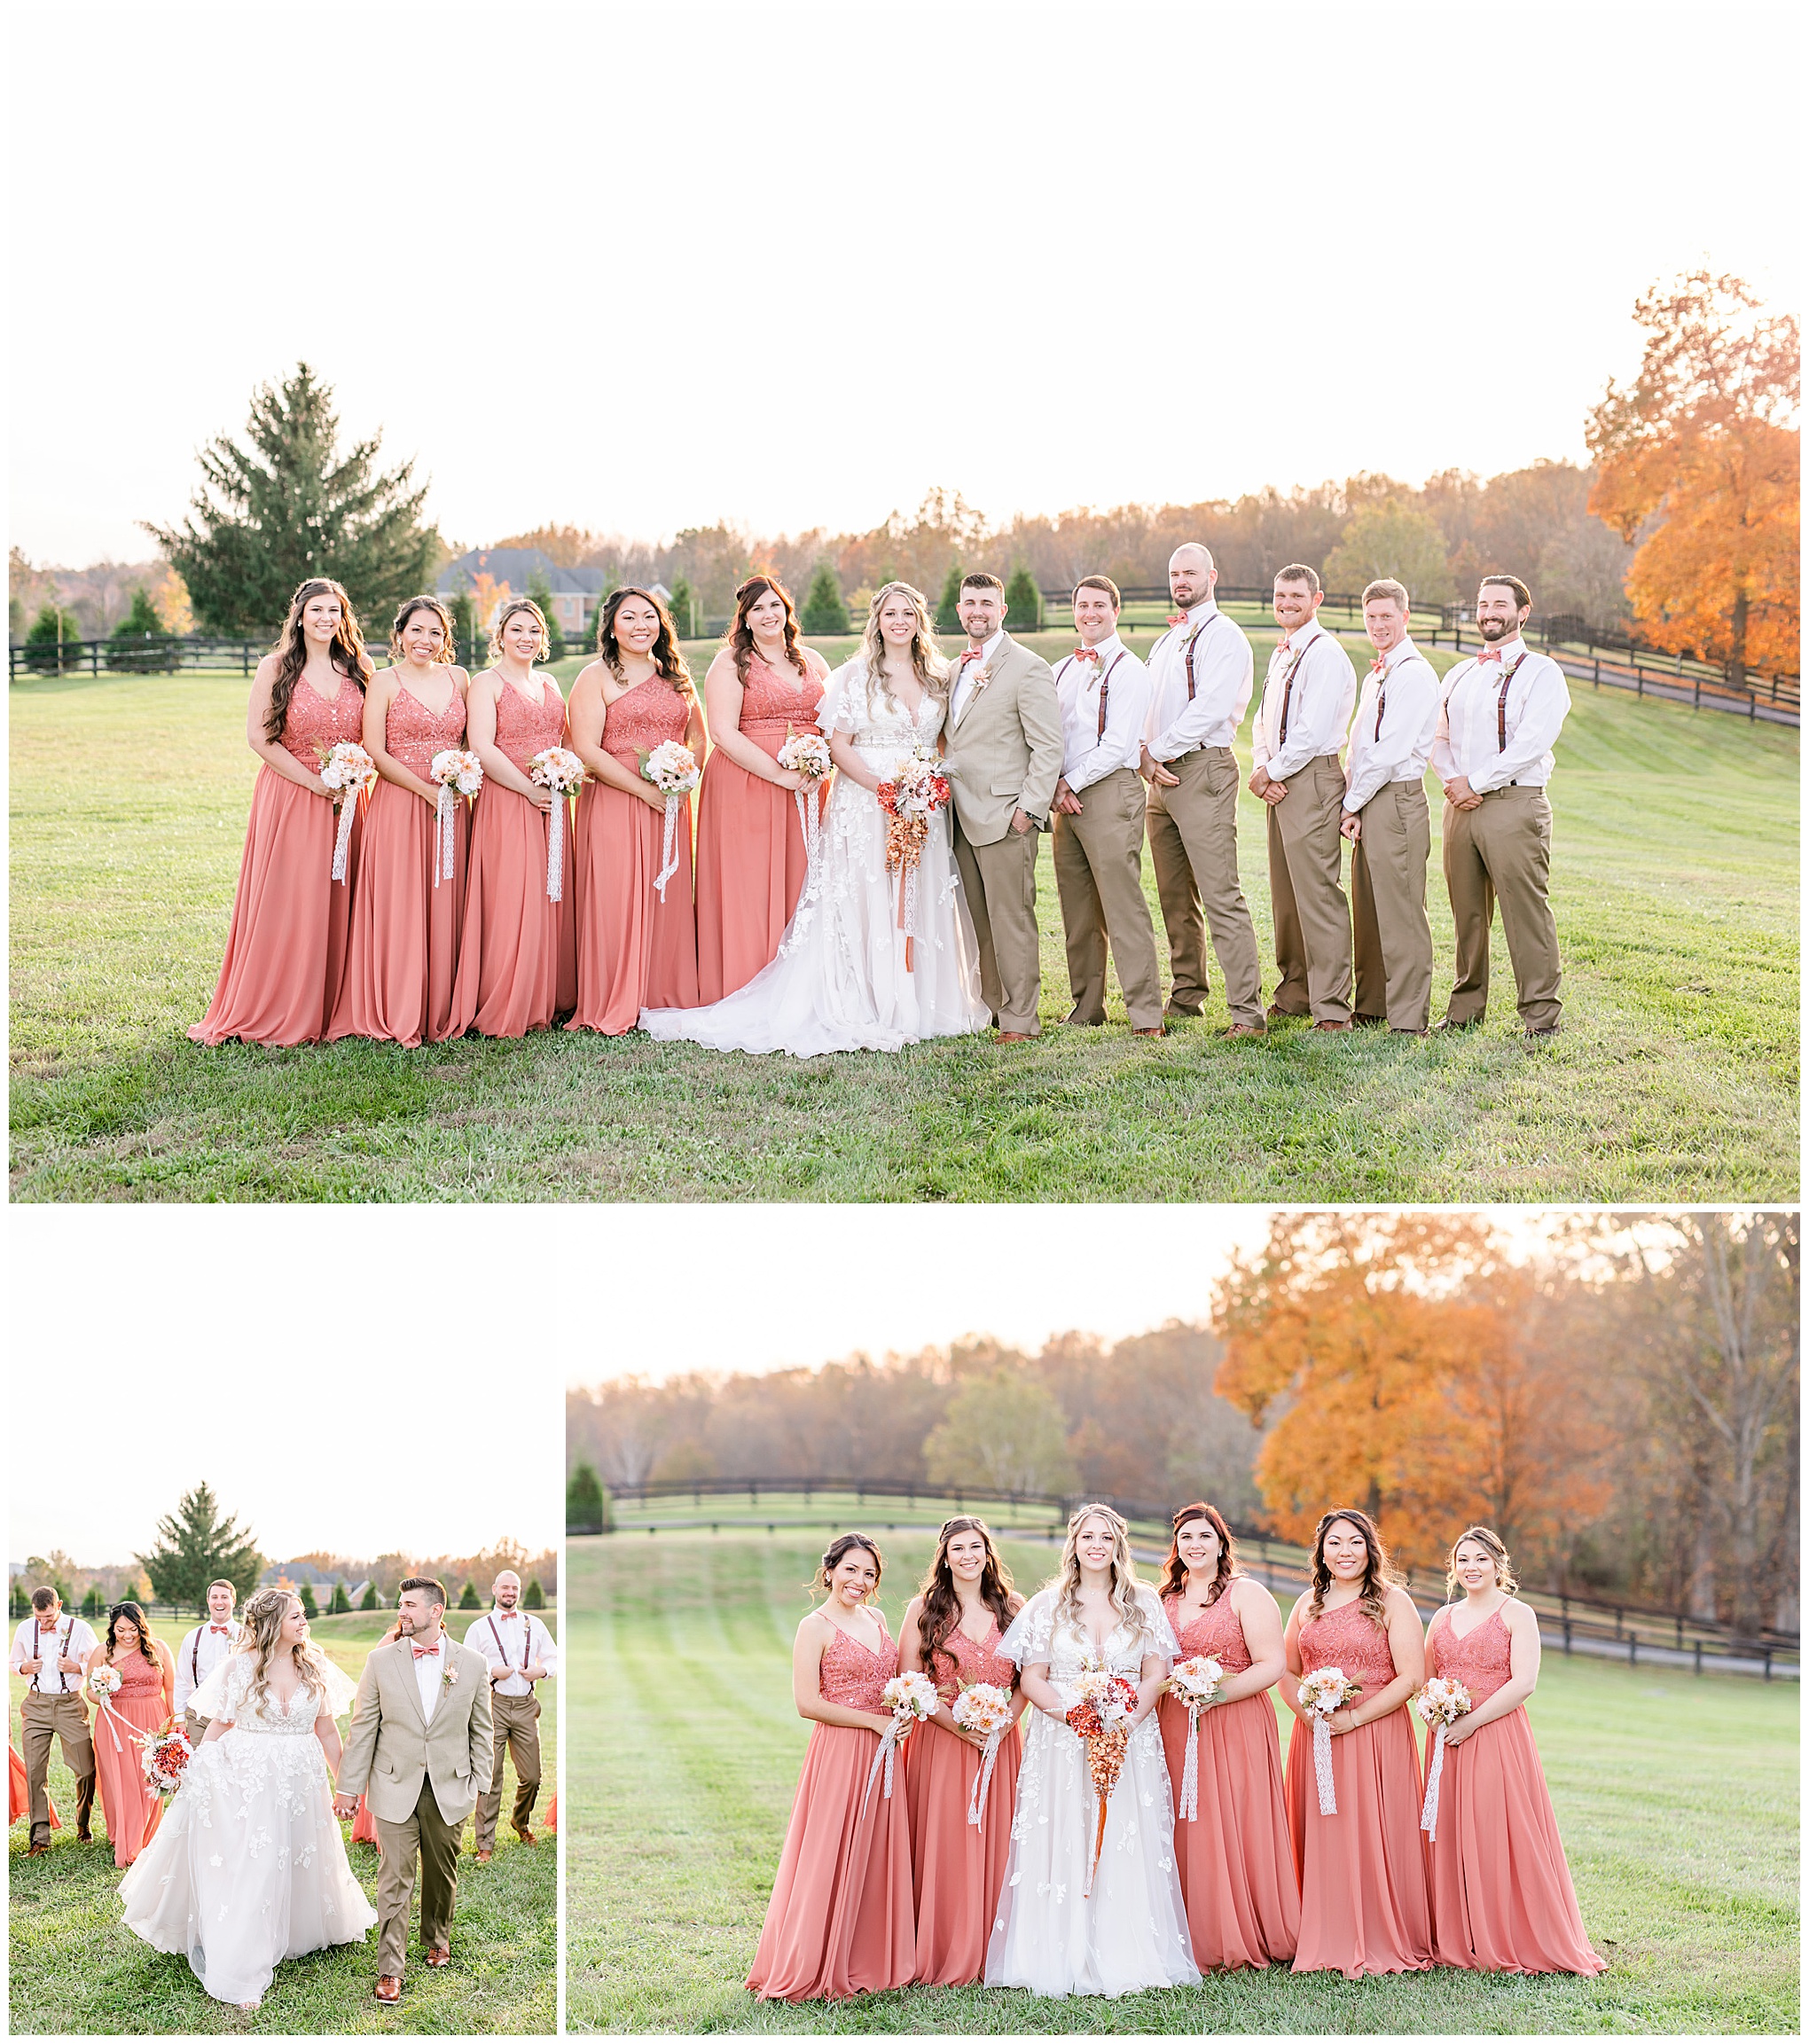 fall colors Middleburg Virginia wedding, Middleburg wedding, Middleburg wedding photographer, Loudoun County wedding photographer, northern Virginia wedding photographer, Middleburg Barn wedding, autumn wedding aesthetic, barn wedding aesthetic, elegant barn wedding, DC wedding photographer, Rachel E.H. Photography, bride and groom with wedding party, bride with bridesmaids, bride and groom holding hands